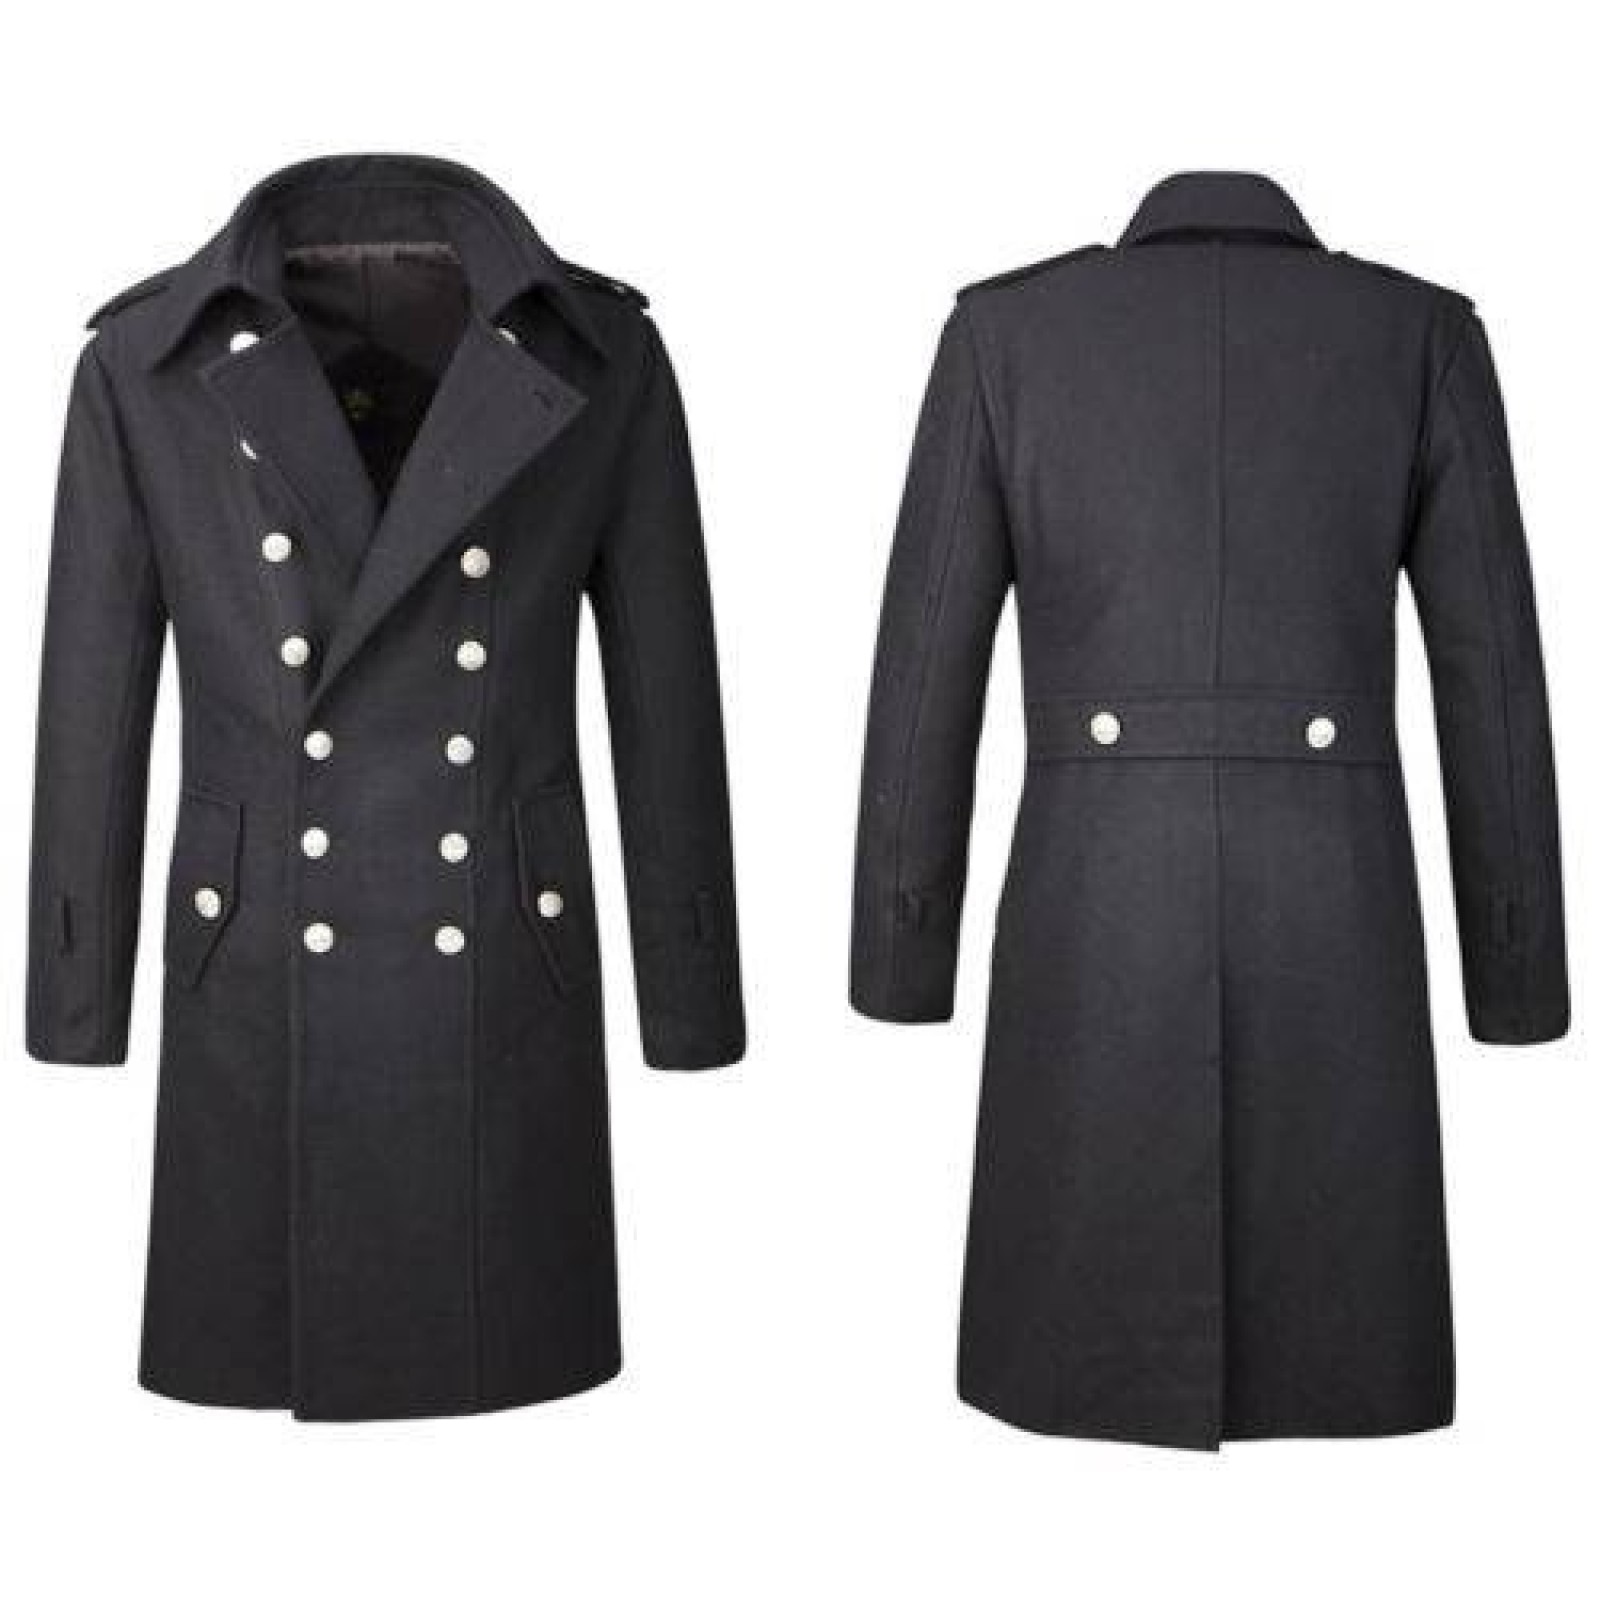 Mens Gothic Overcoat Military Double Breasted Wool Mens Trench Coat